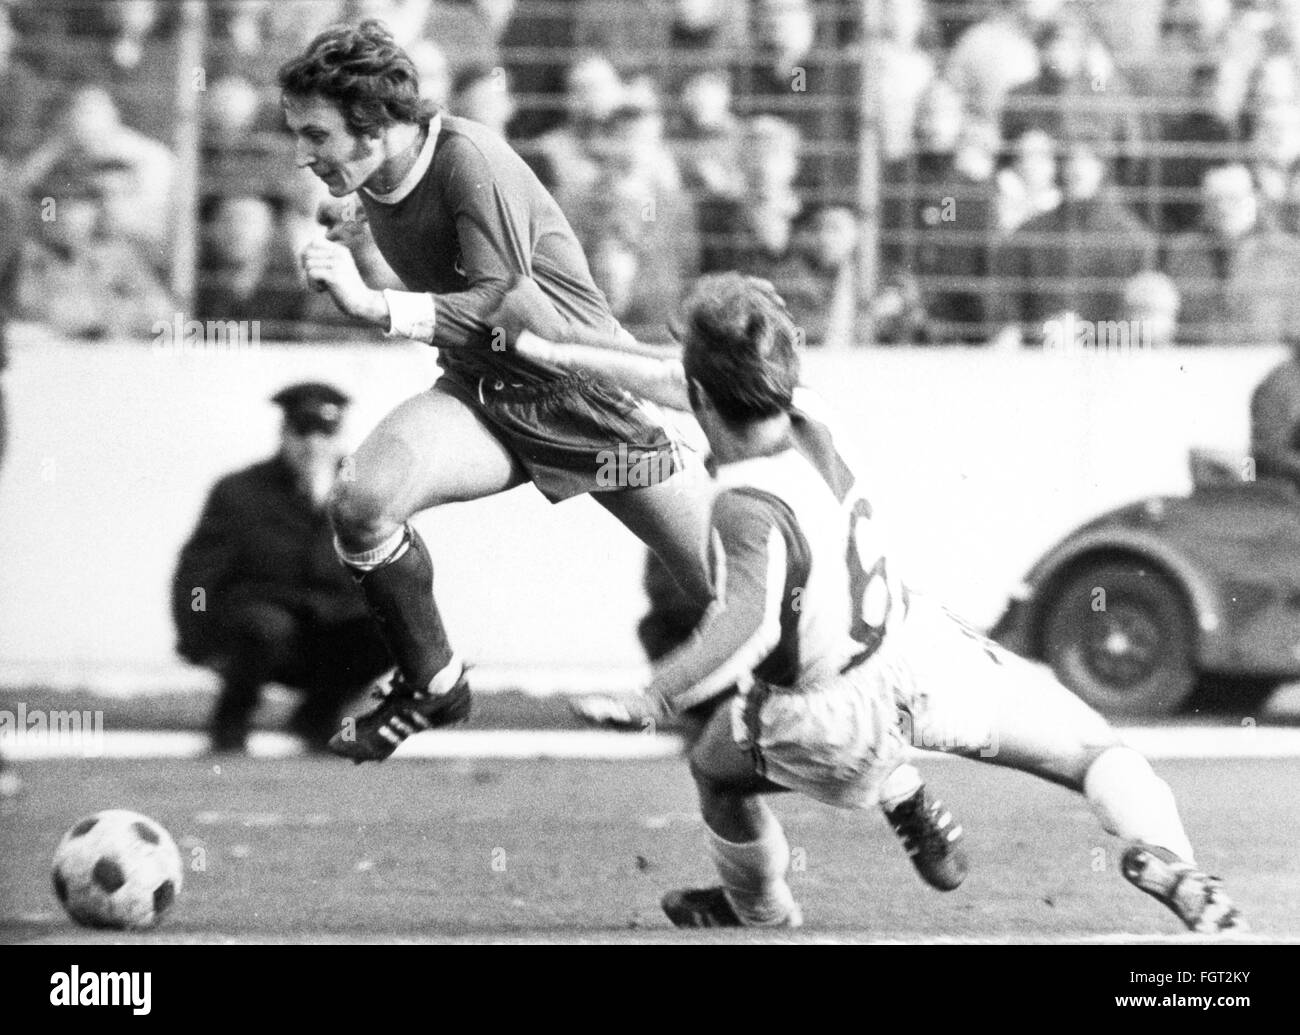 sports,football,games,Germany,national league,season 1970 / 1971,22nd match day,game 1. FC Koeln versus Hertha BSC(3: 1),Muengersdorf stadium,Cologne,27.2.1971,defender Laszlo Gergely(Hertha)tries to stop Heinz Flohe,football match,soccer match,football matches,footballer,footballers,kicker,football player,football players,action,act,actions,acts,attack,offensive move,attacks,offensive moves,defence,defense,defences,defenses,running,run,runs,ball,playing,play,keep,keeping,holding,hold,foul,fouls,West Germany,Weste,Additional-Rights-Clearences-Not Available Stock Photo